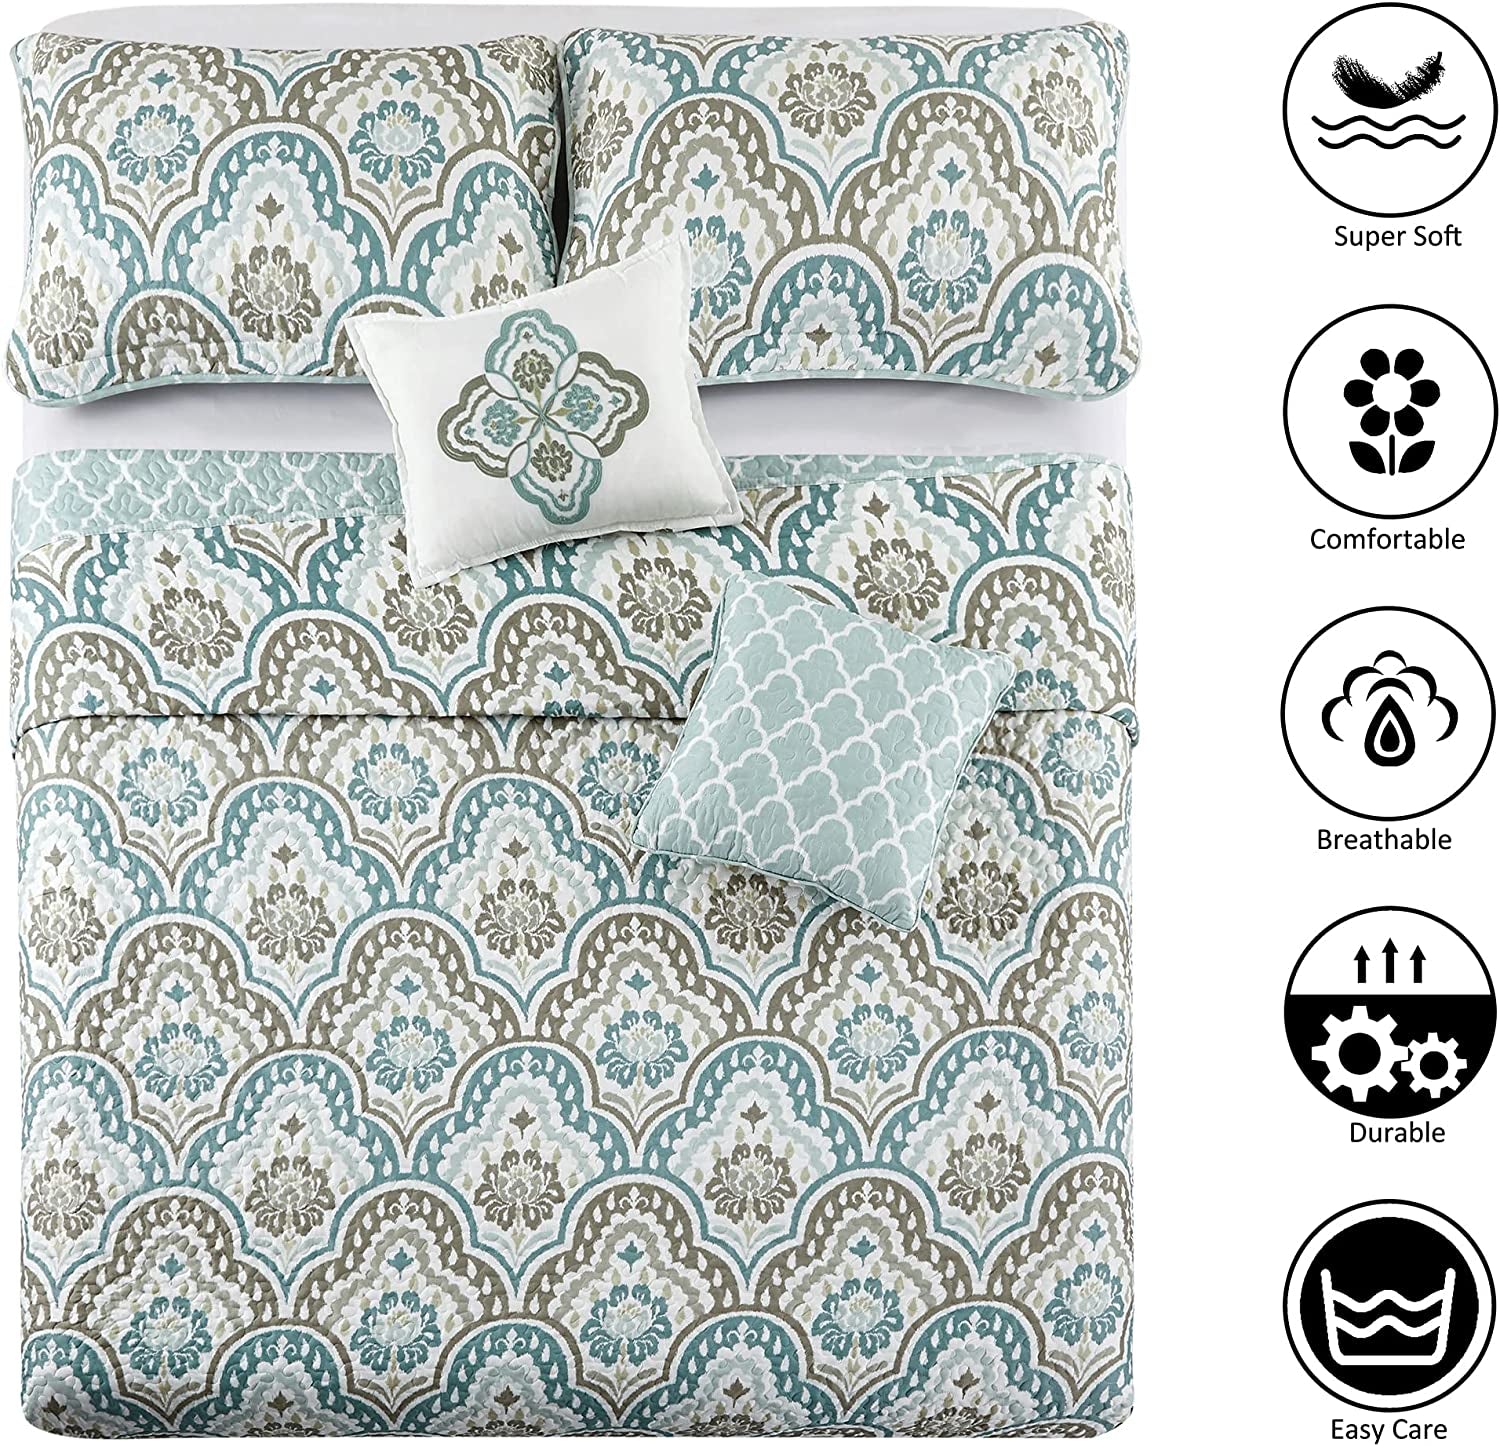 Tivoli Ikat Queen Size 90" X 90" 5 Piece Teal Aqua Printed Prewashed Quilted Coverlet Bedspread Bed Cover Set for All Season, Lightweight Quilt Blanket with Matching Shams Pillows